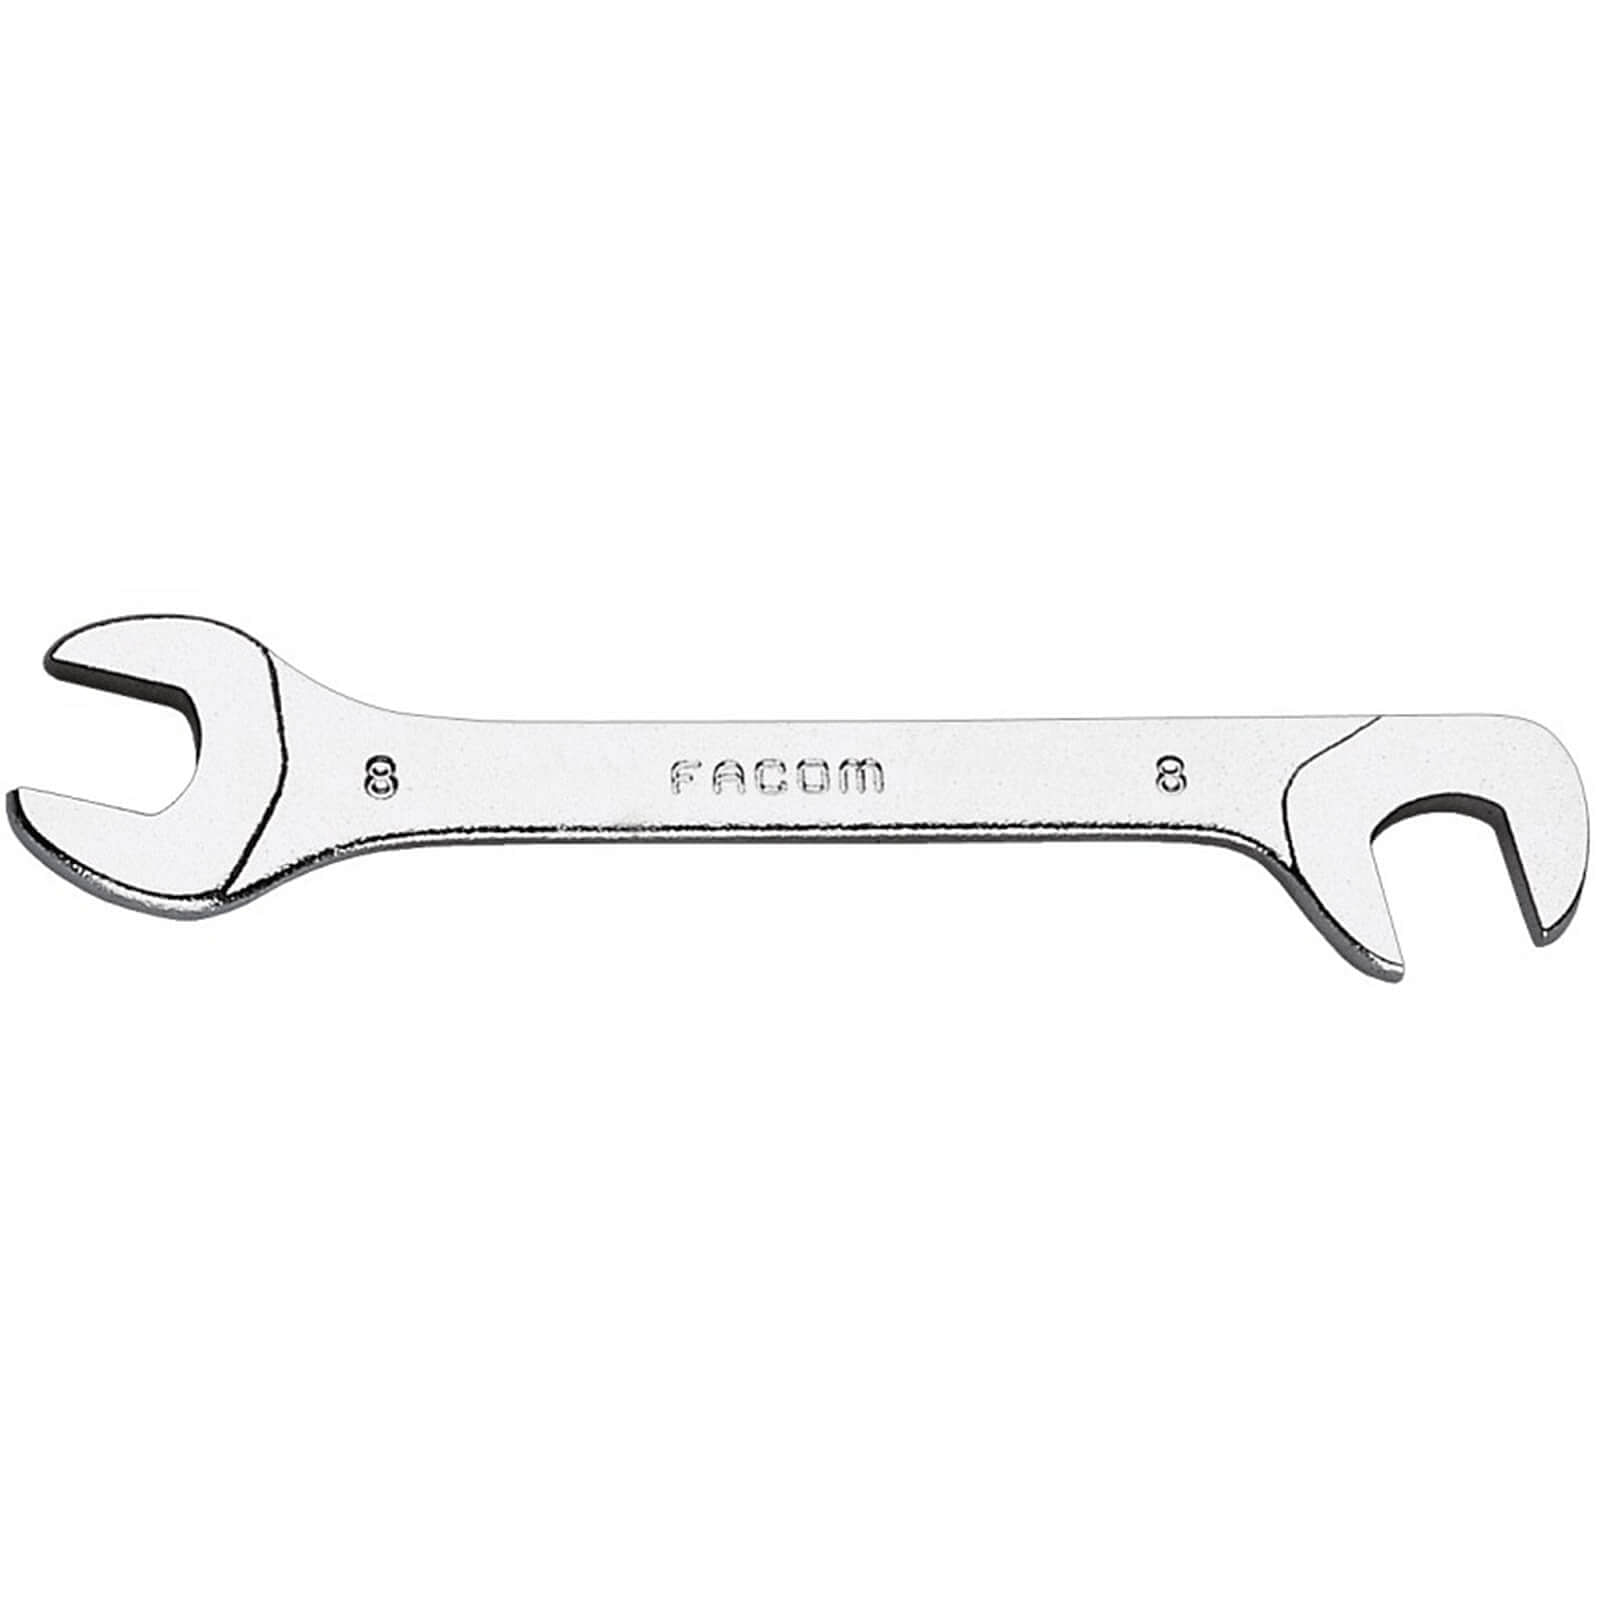 COMBINATION SPANNER WRENCH 27mm FACOM 41.27 OFFSET CRANKED RING END 